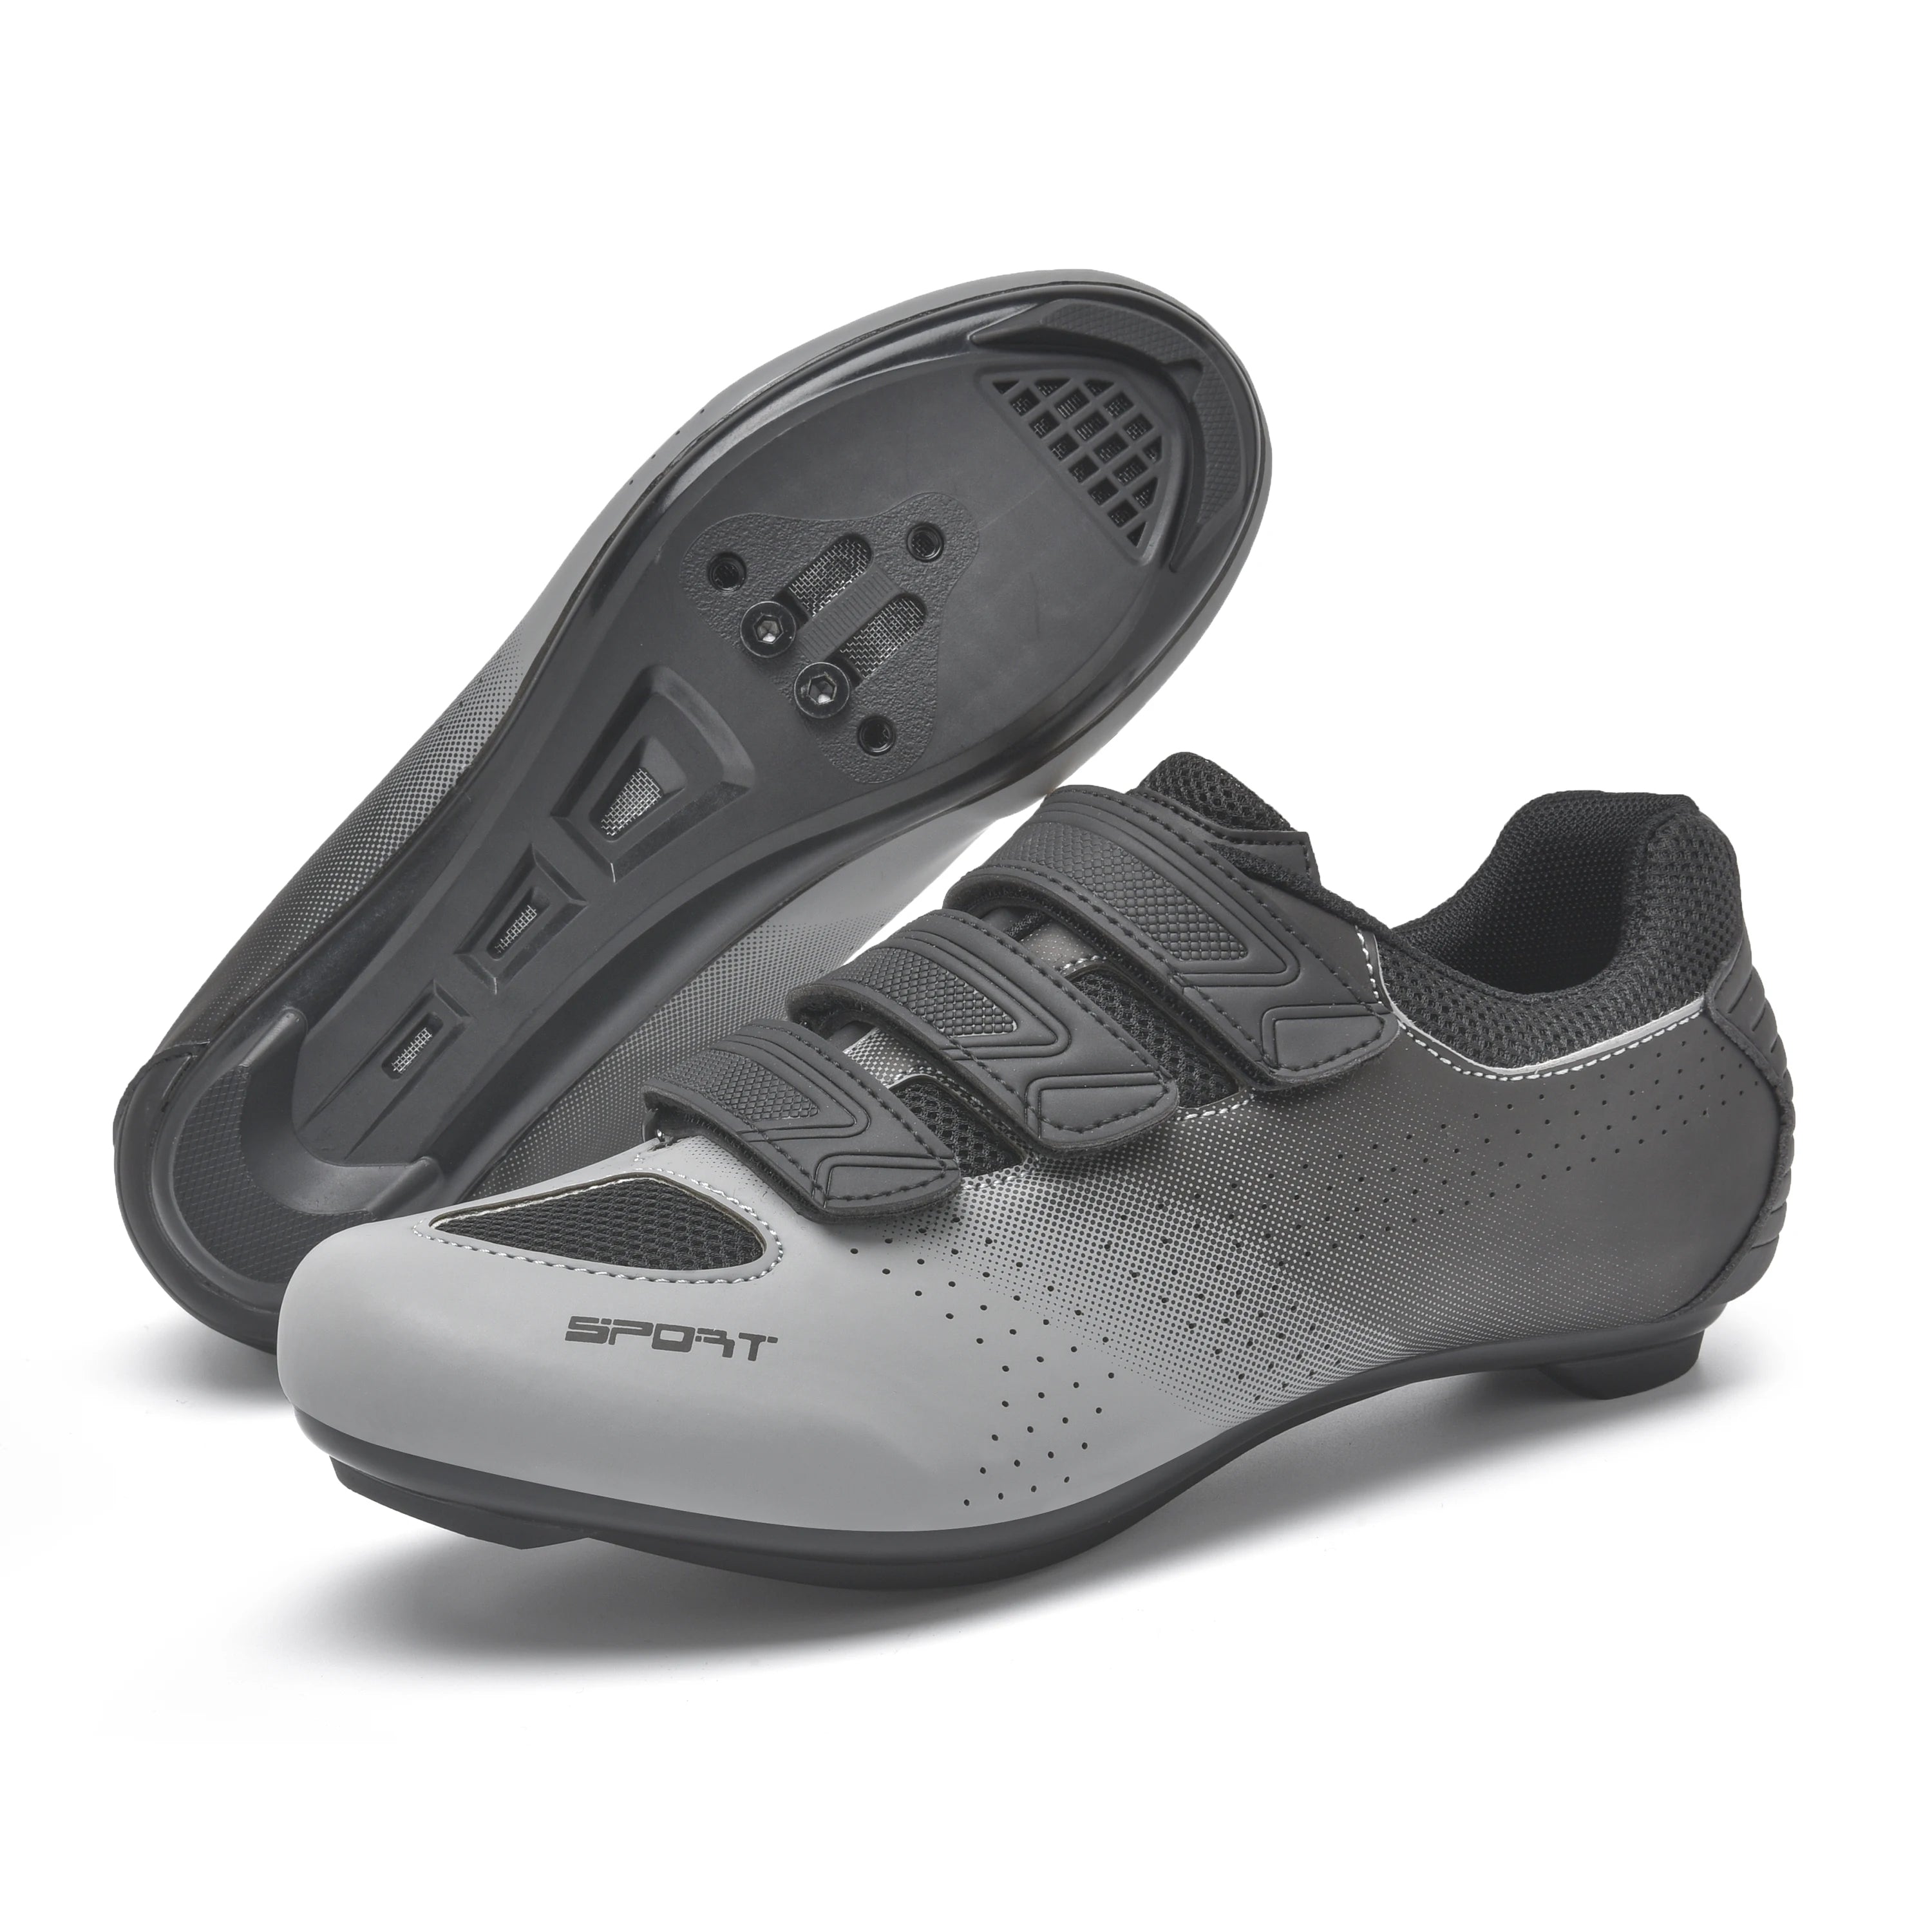 Women Cycling Shoes for Road or Mountain bike- With Cleats,  Cleatless, or flat rubber